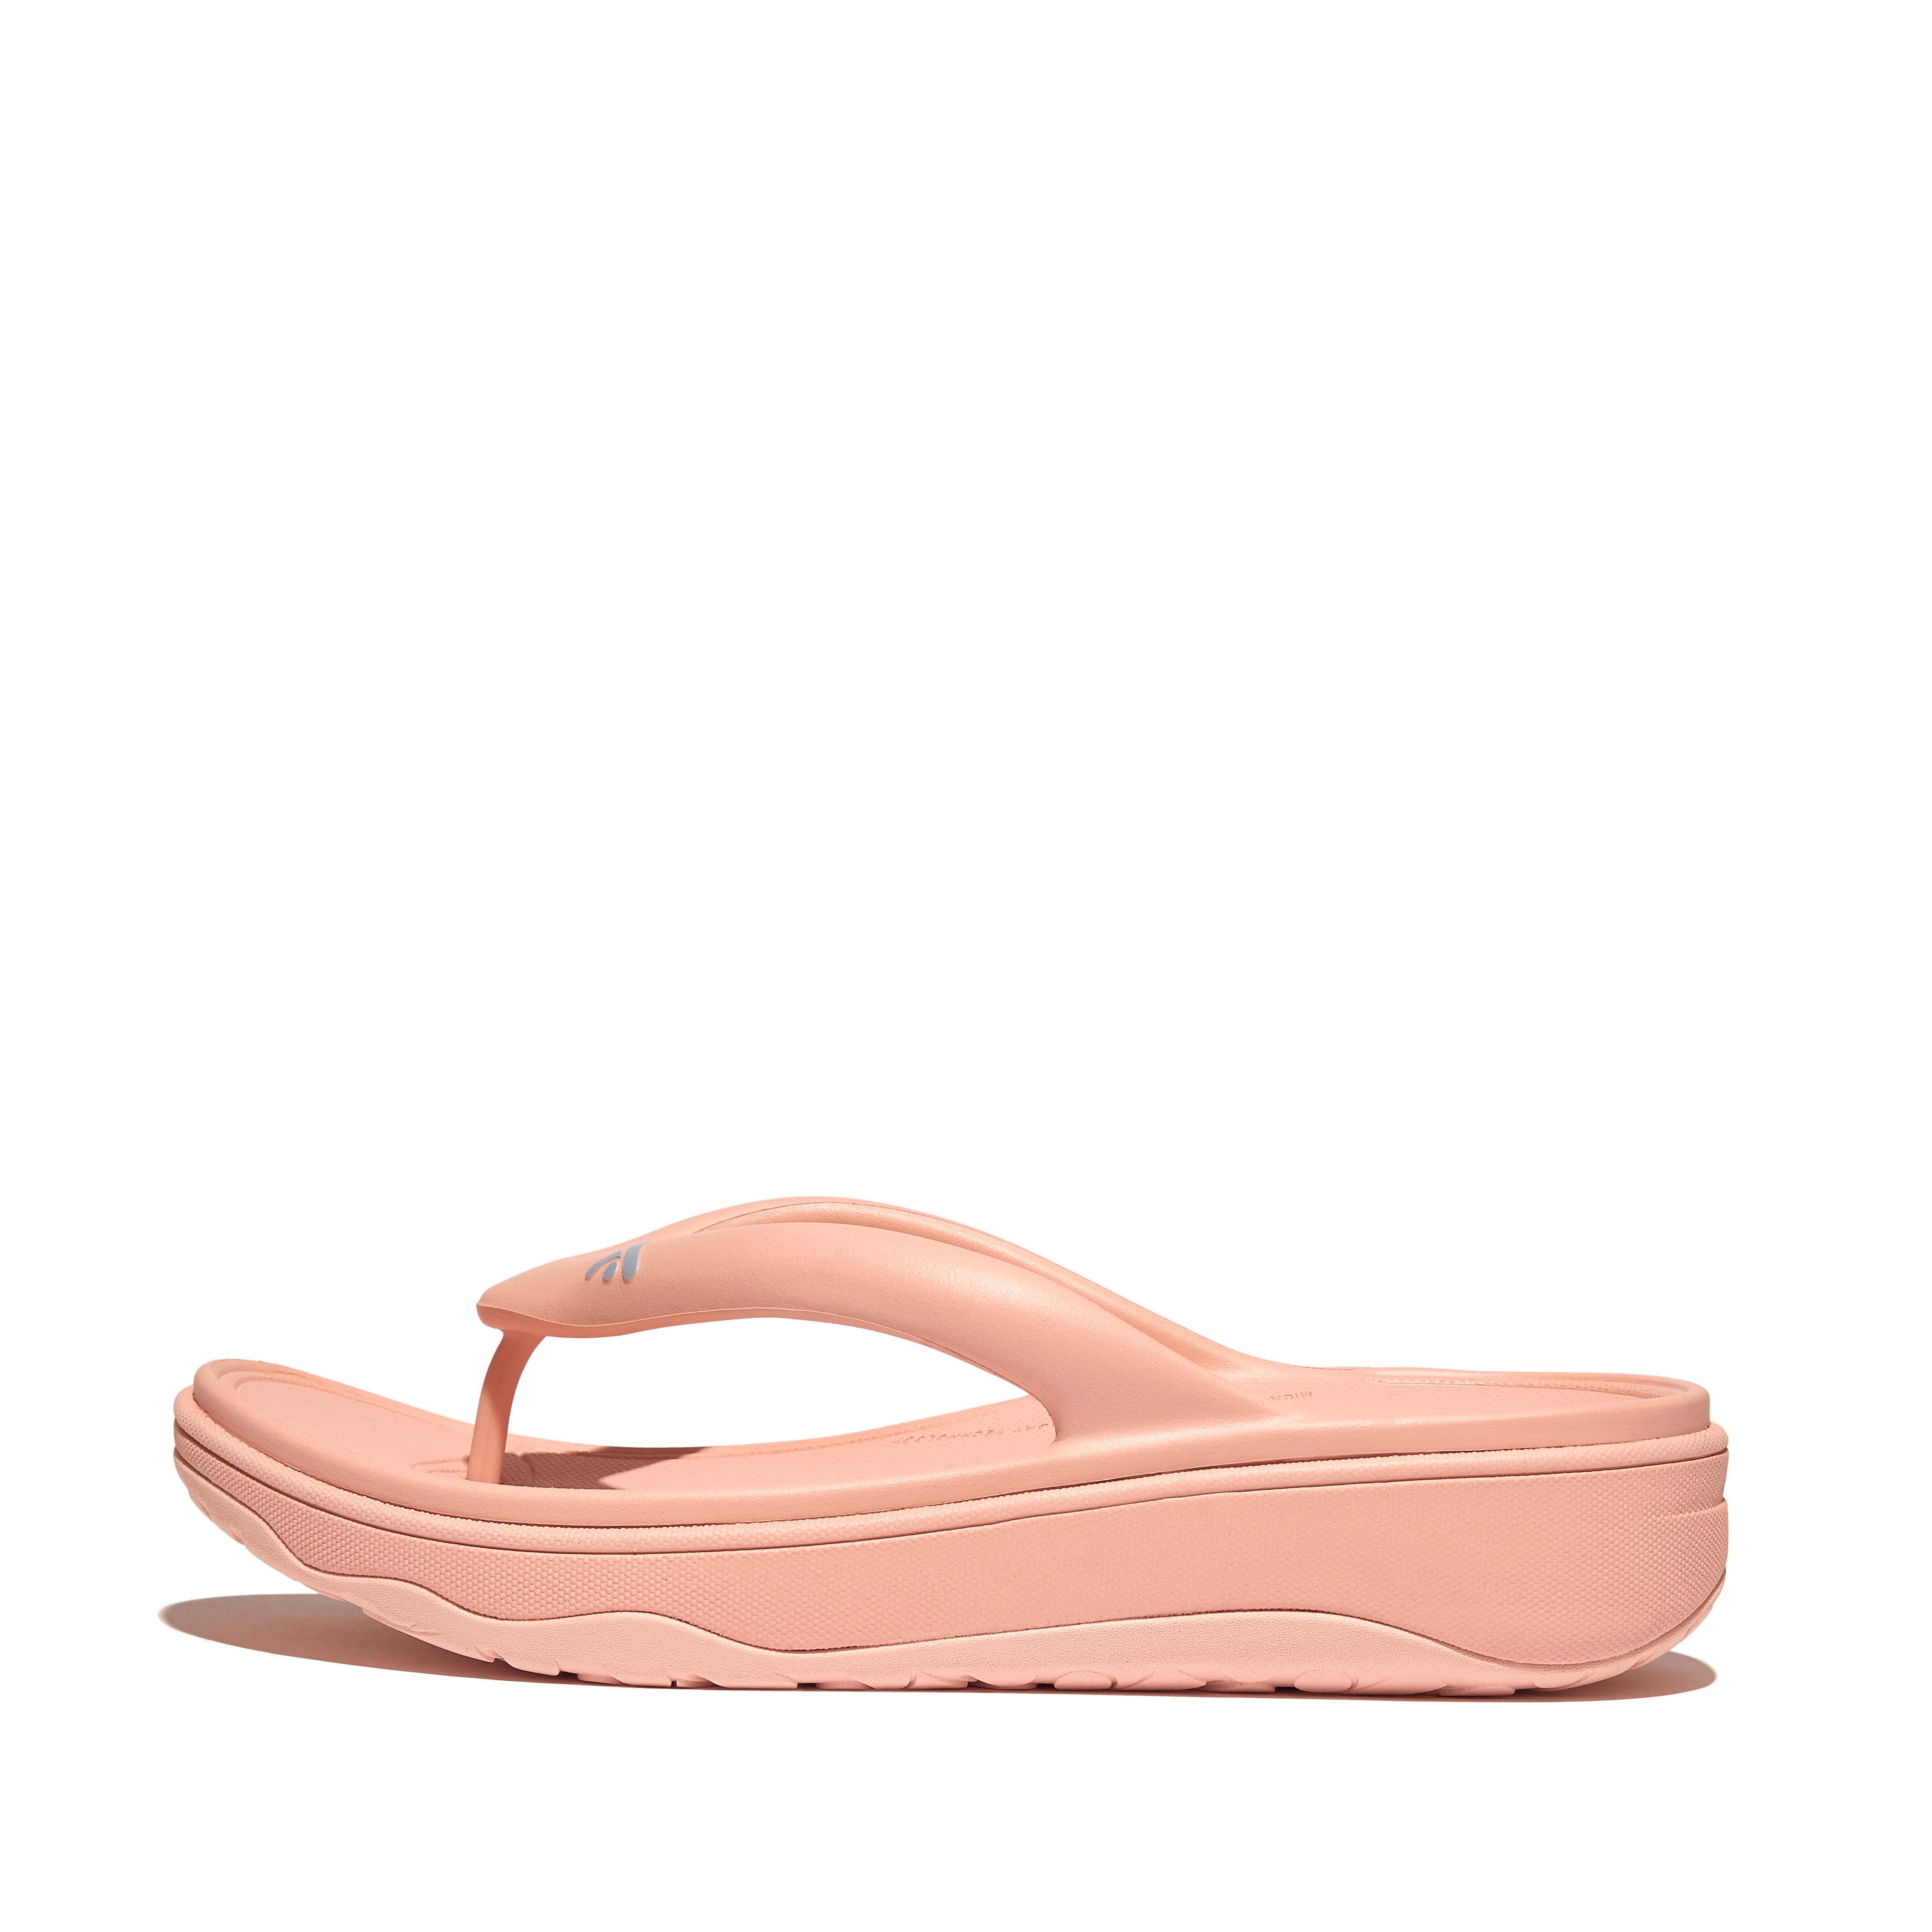 FitFlop Relieff